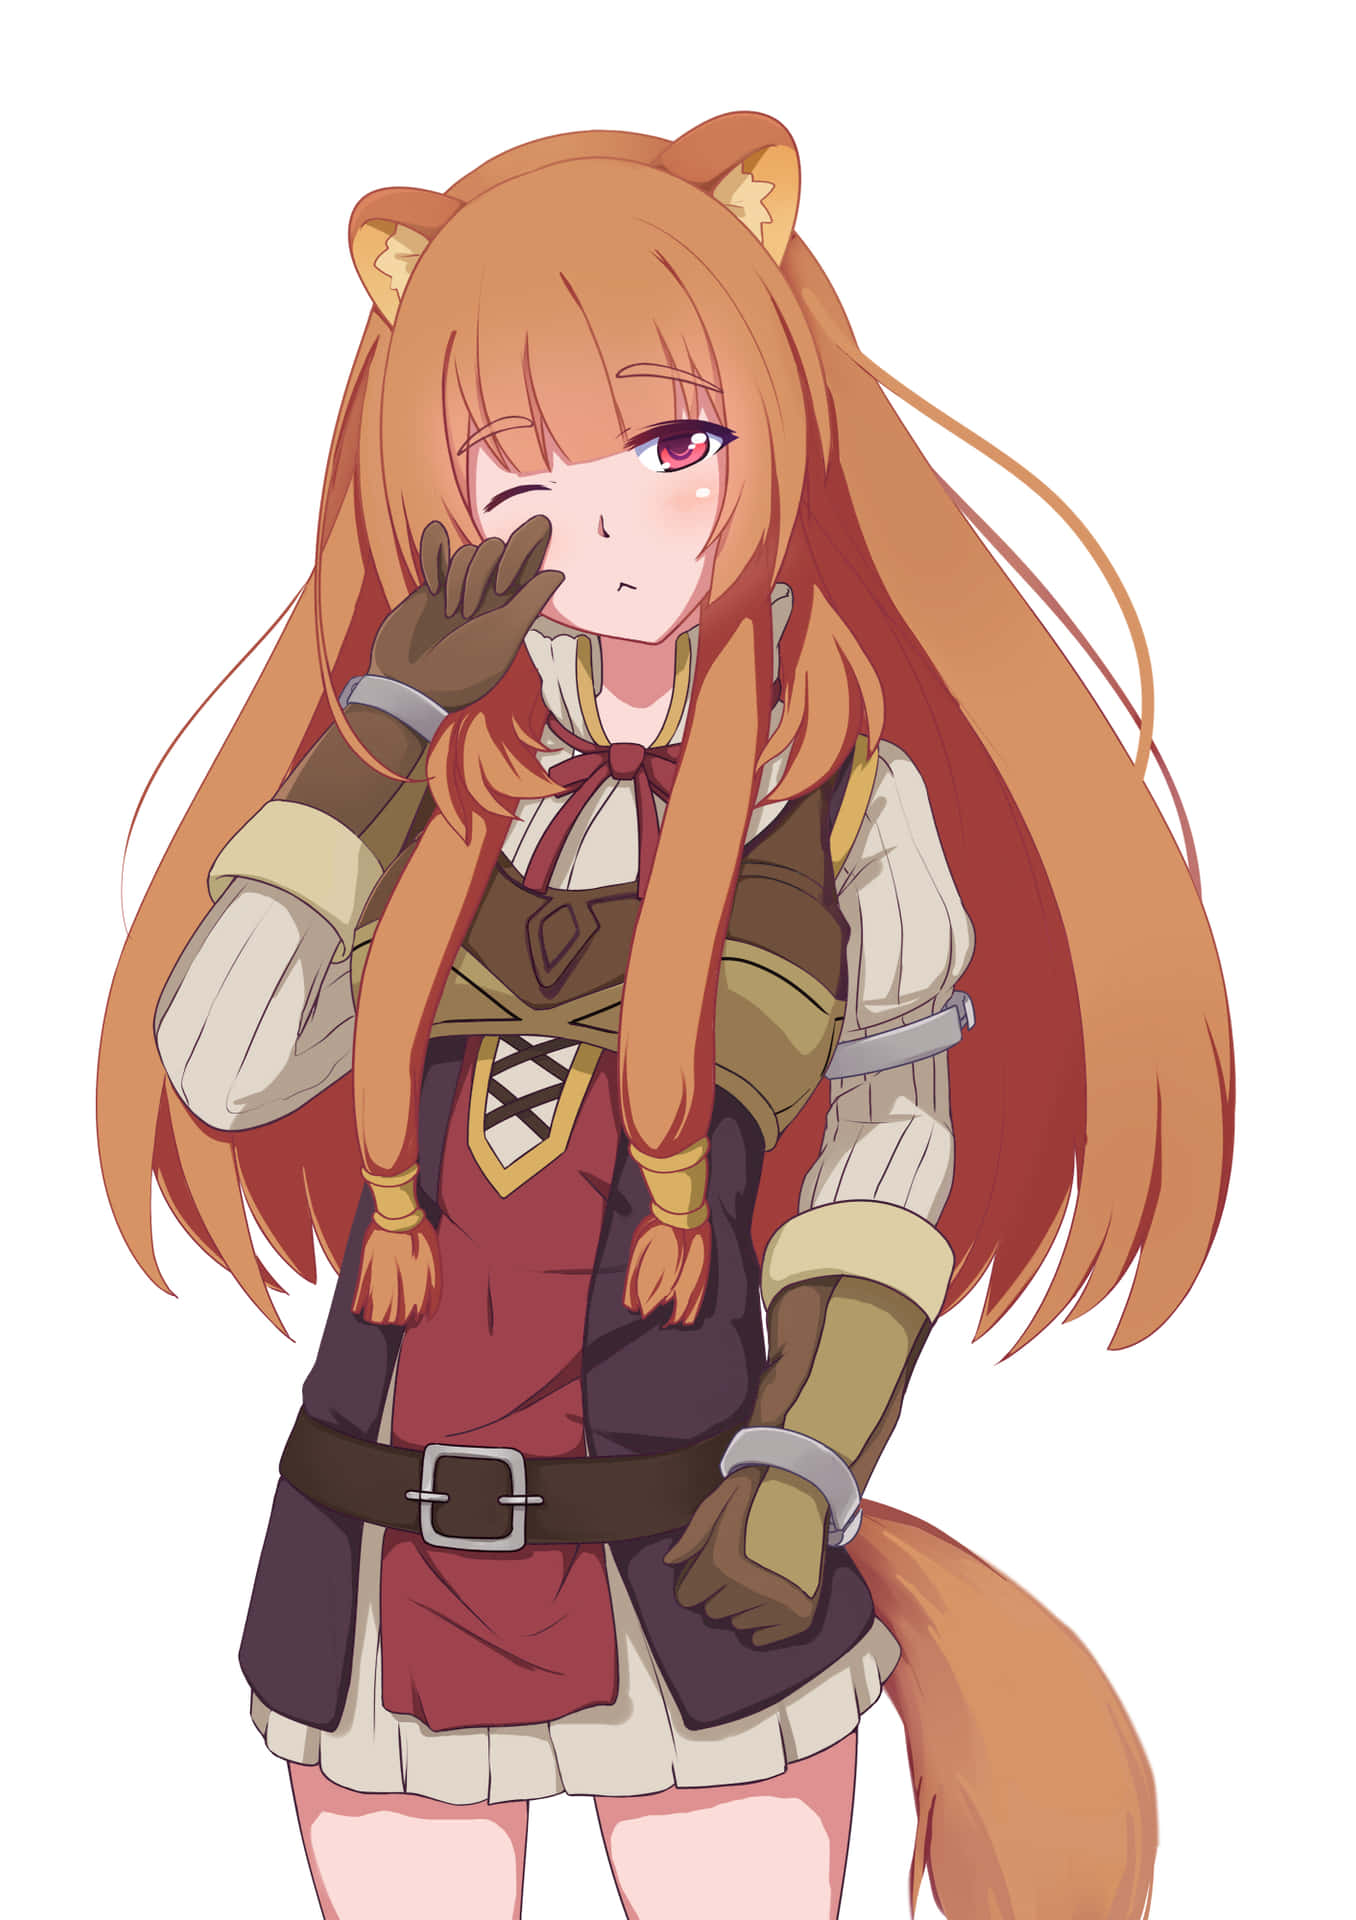 Raphtalia from the Anime Series 'The Rising of The Shield Hero'